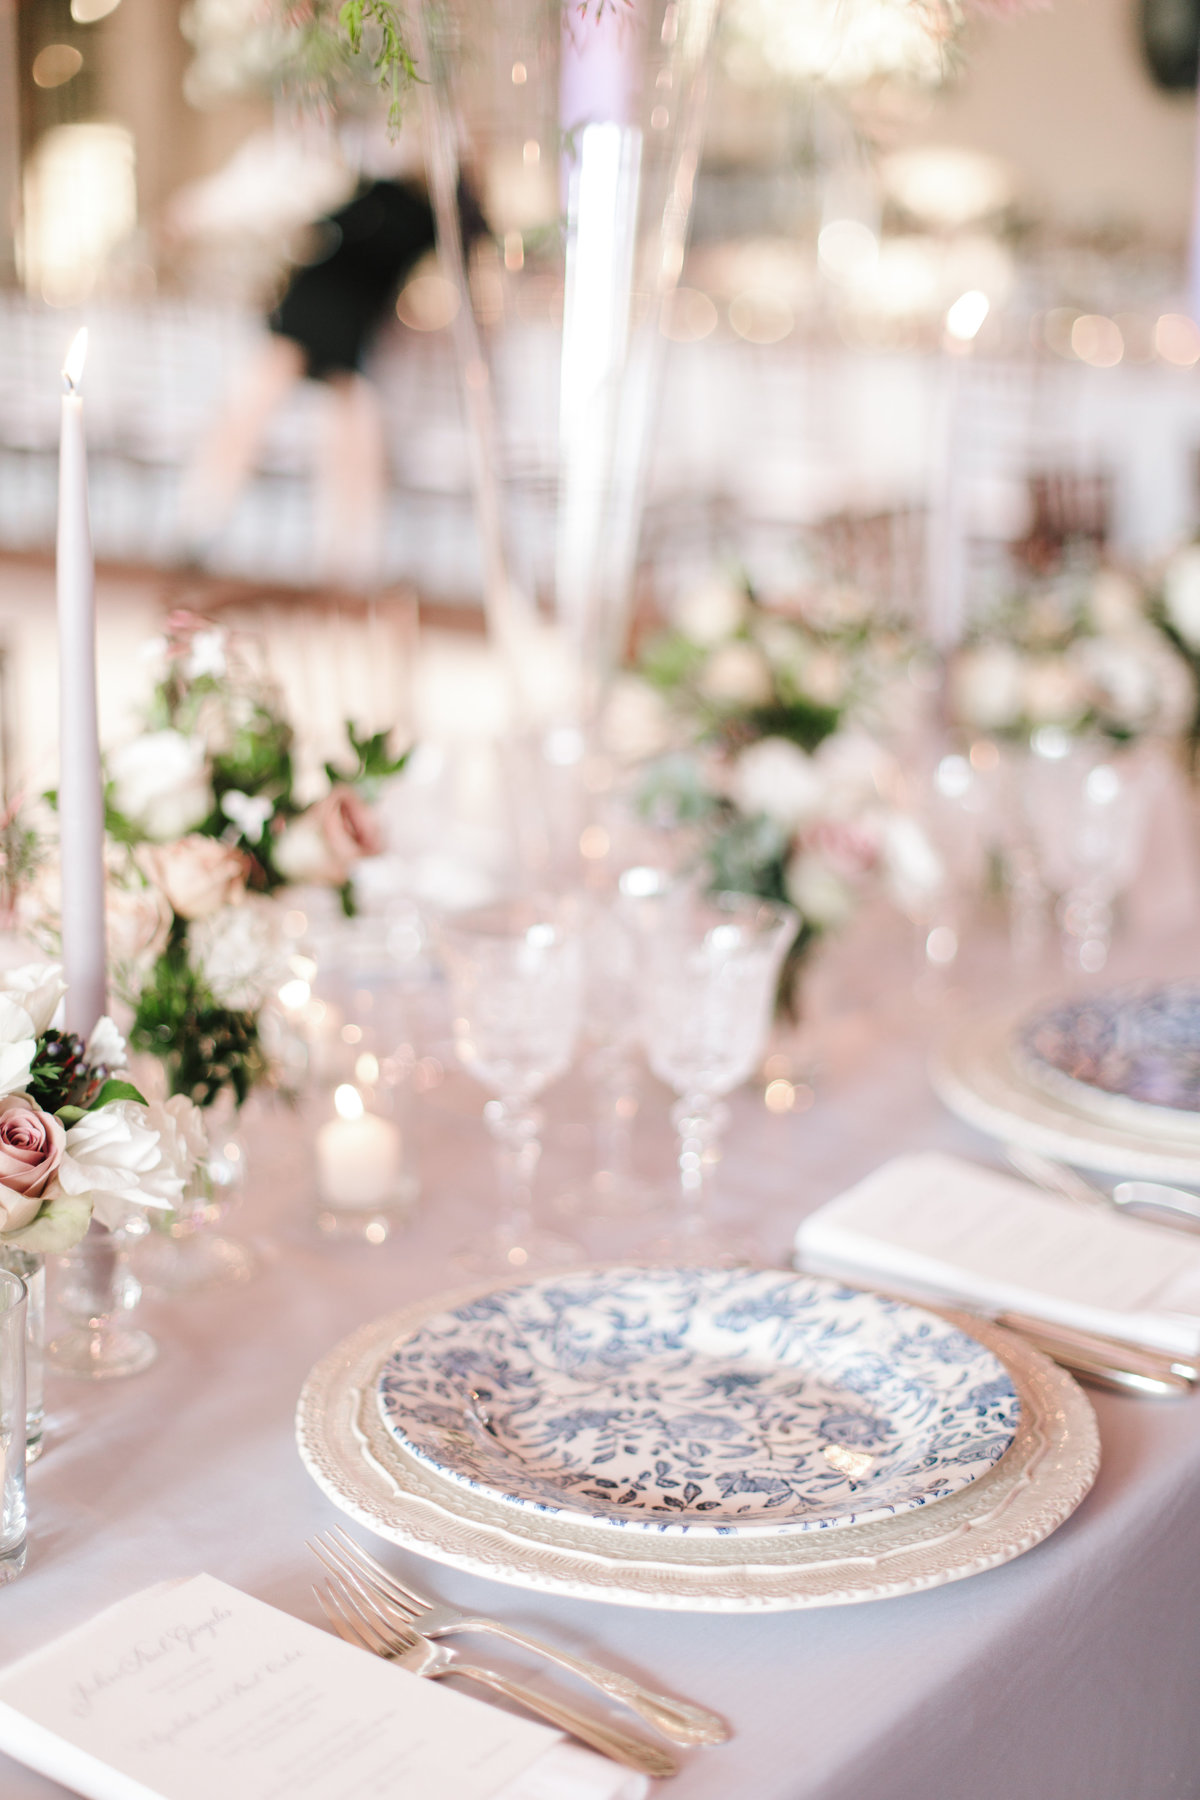 Tablescape for wedding by Jenny Schneider Events at The Anthenaeum in Pasadena, California. Photo by Heather Kincaid Photography.